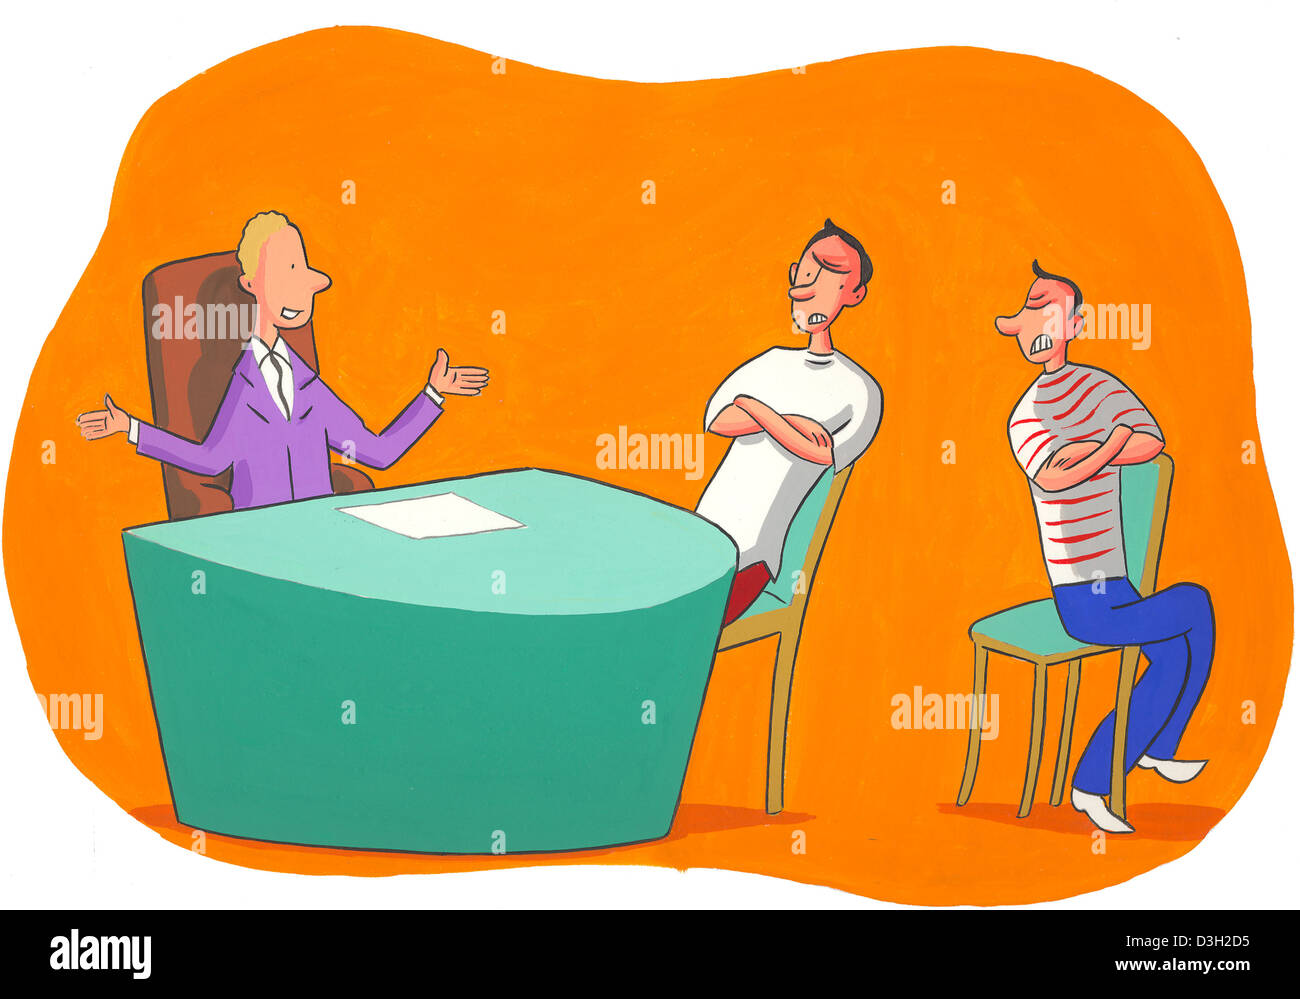 CONFLICT IN A FAMILY, DRAWING Stock Photo